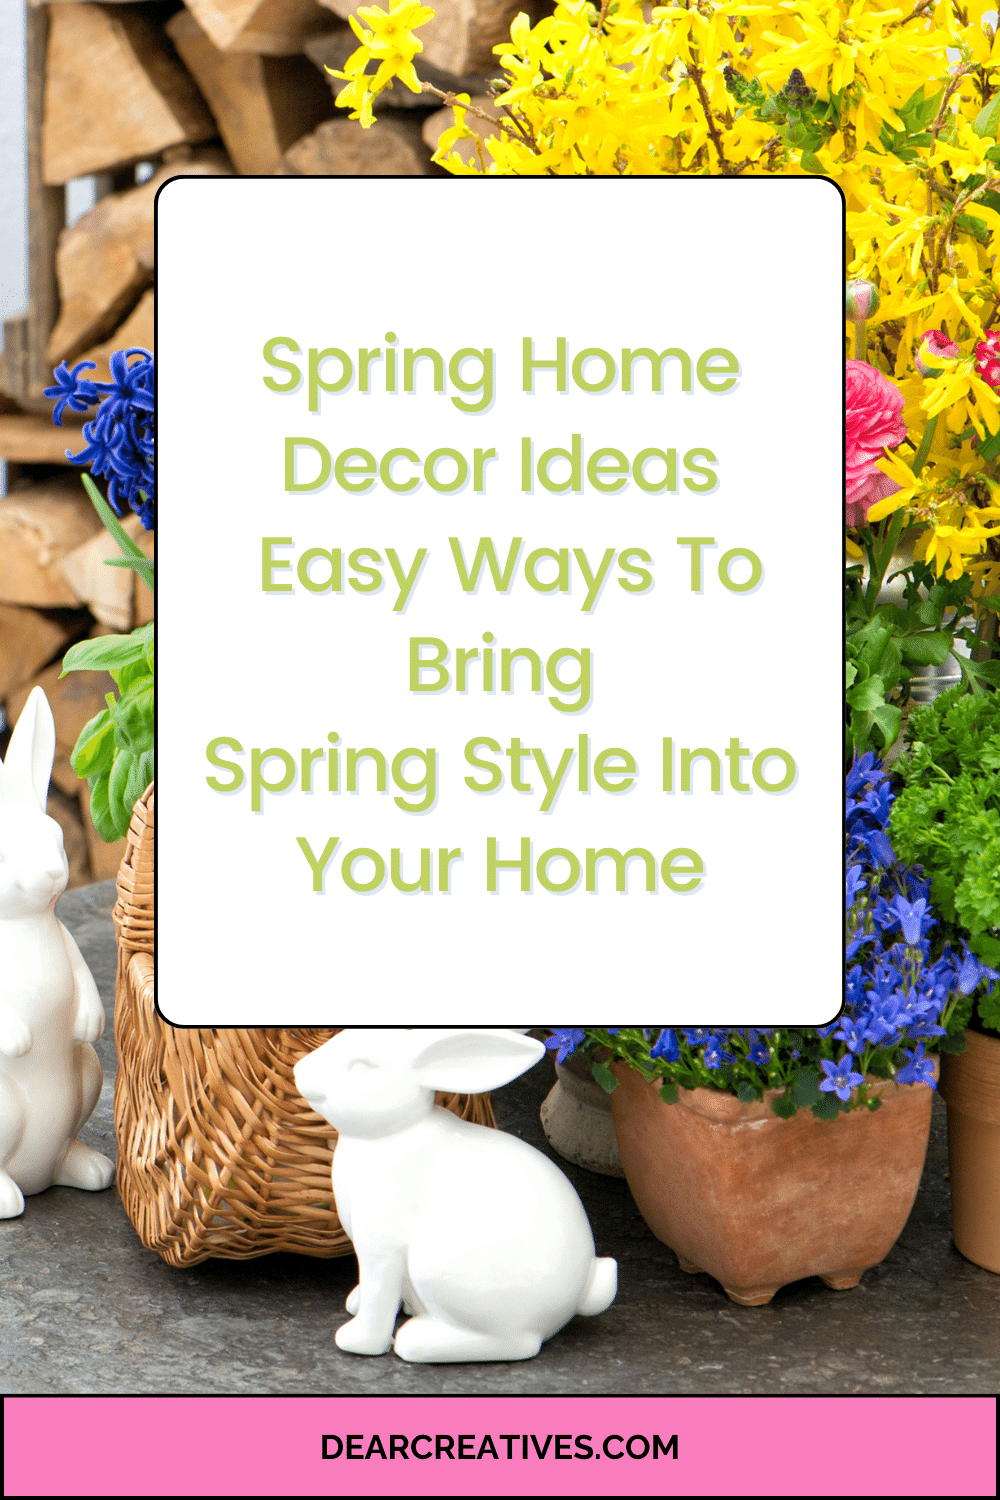 Spring Home Decor Ideas Spring Decorations and Spring accents for the home, apartment, or dorm - Spring Decorations for the home that are pretty, cheery, cute, and you will love decorating with. Get ideas for how to decorate for spring. DearCreatives.com